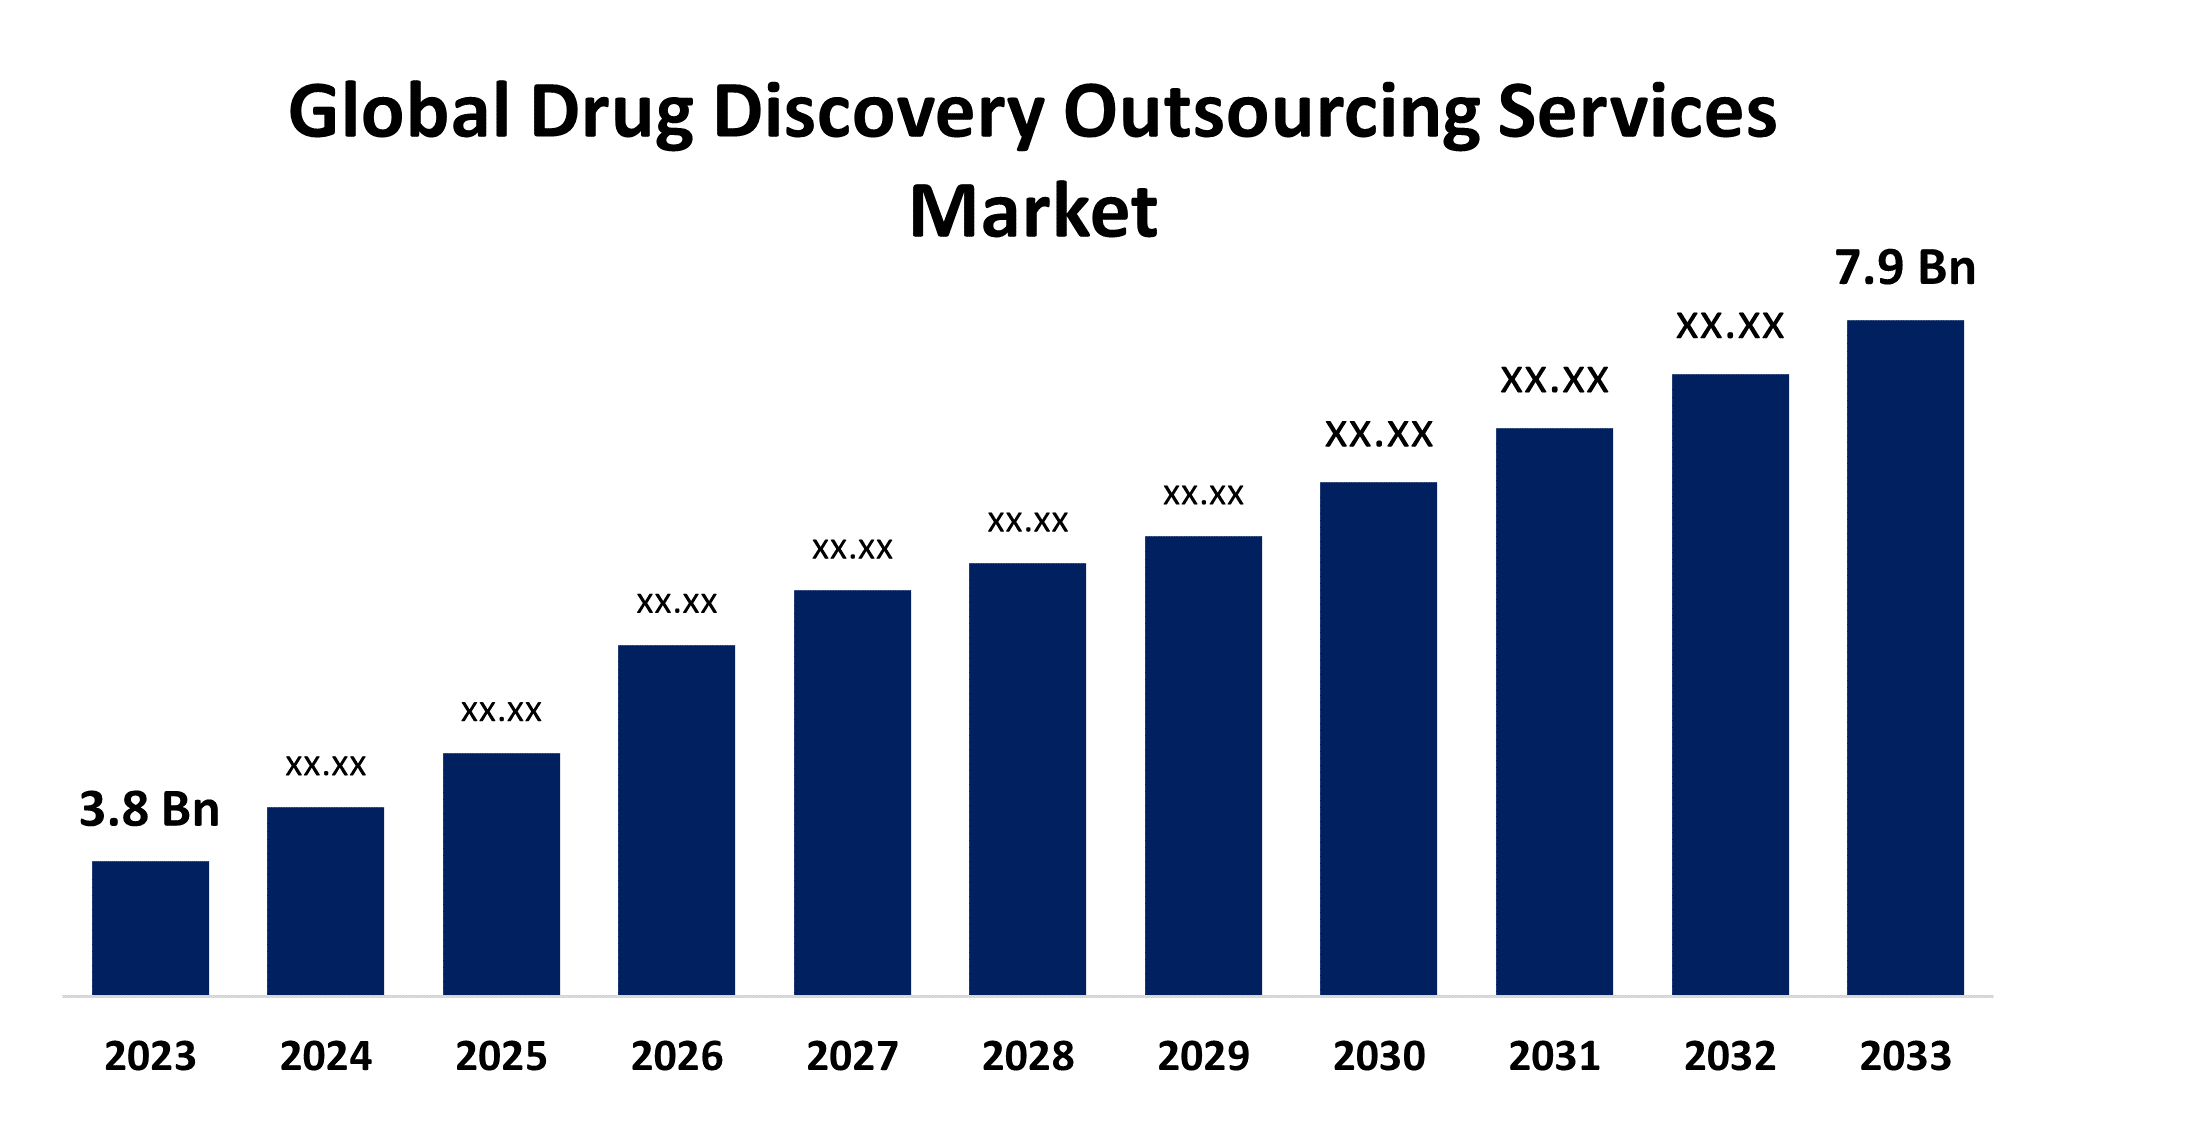 Global Drug Discovery Outsourcing Services Market